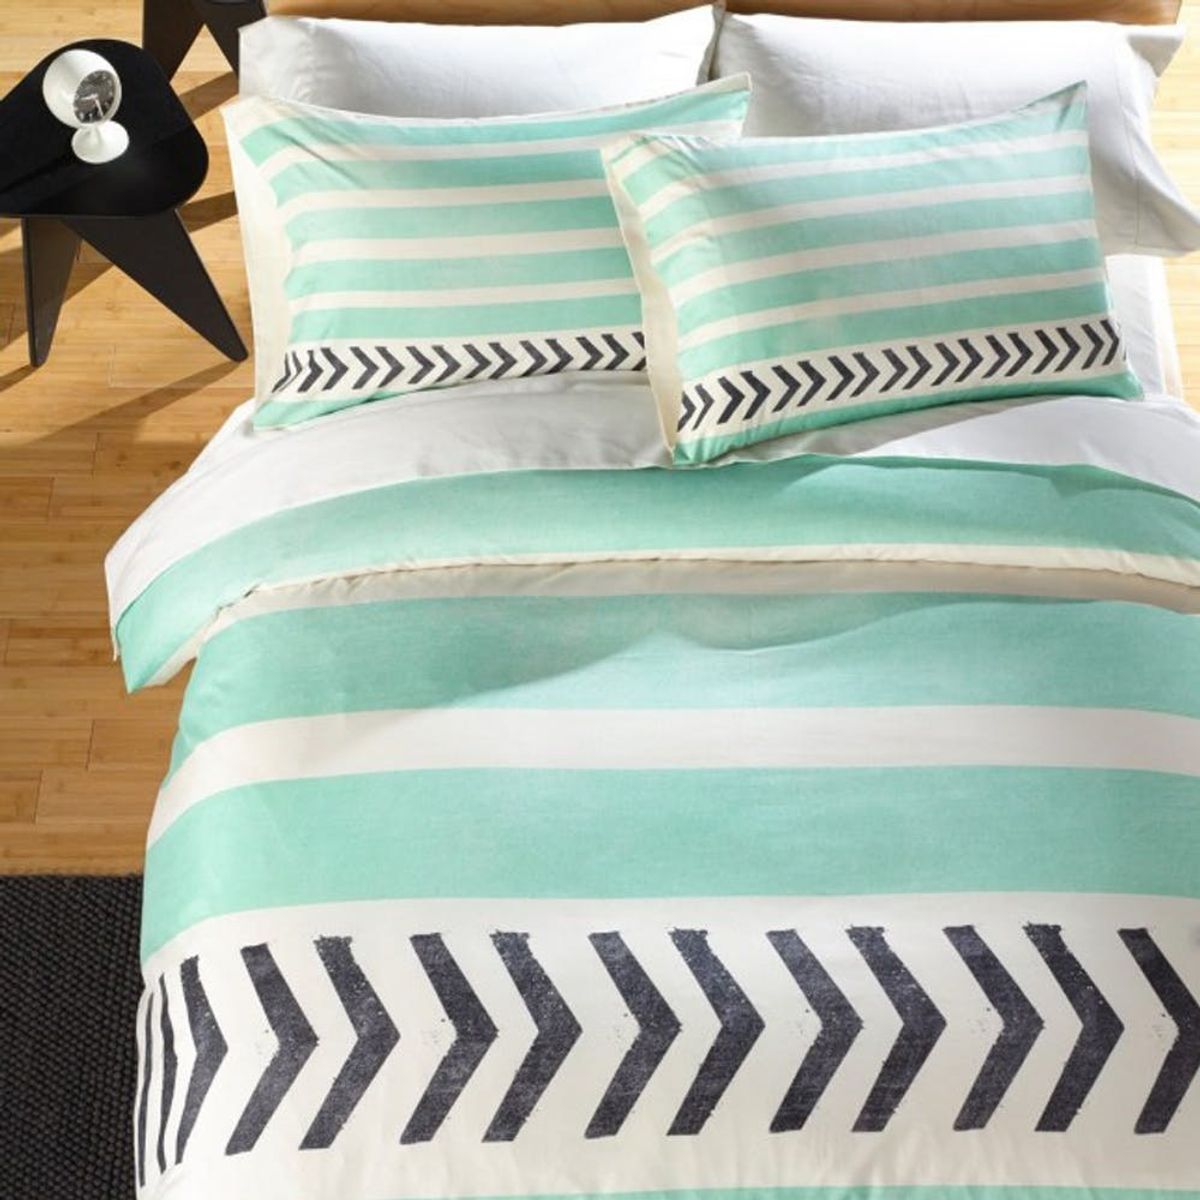 14 Colorful Duvet Covers to Get Your Bedroom Ready for Spring